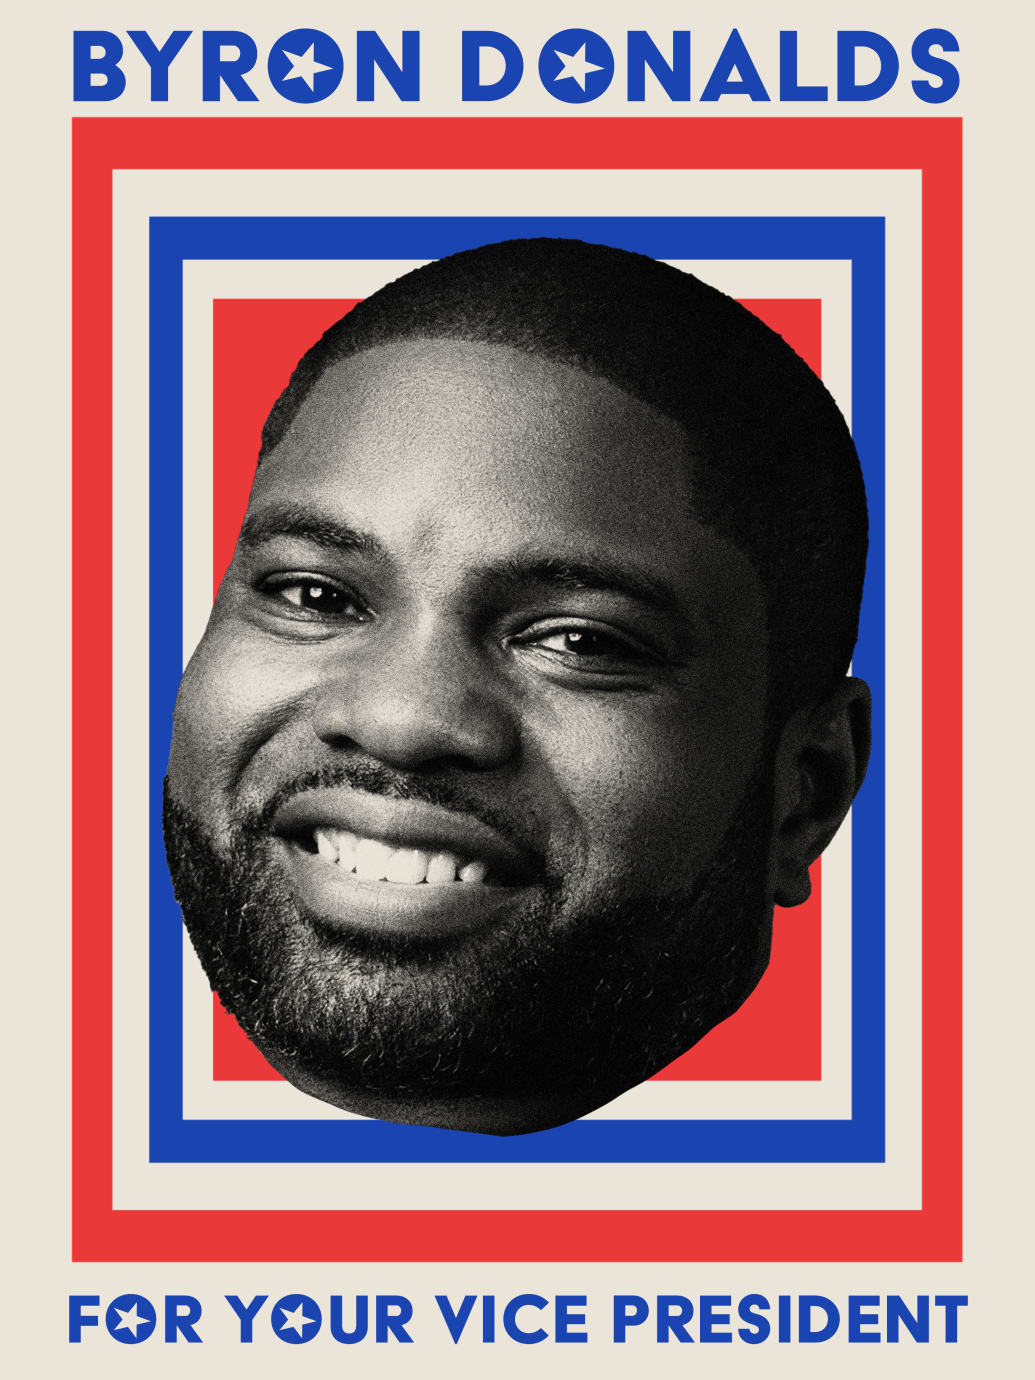 Vice Presidential campaign poster featuring Byron Donalds